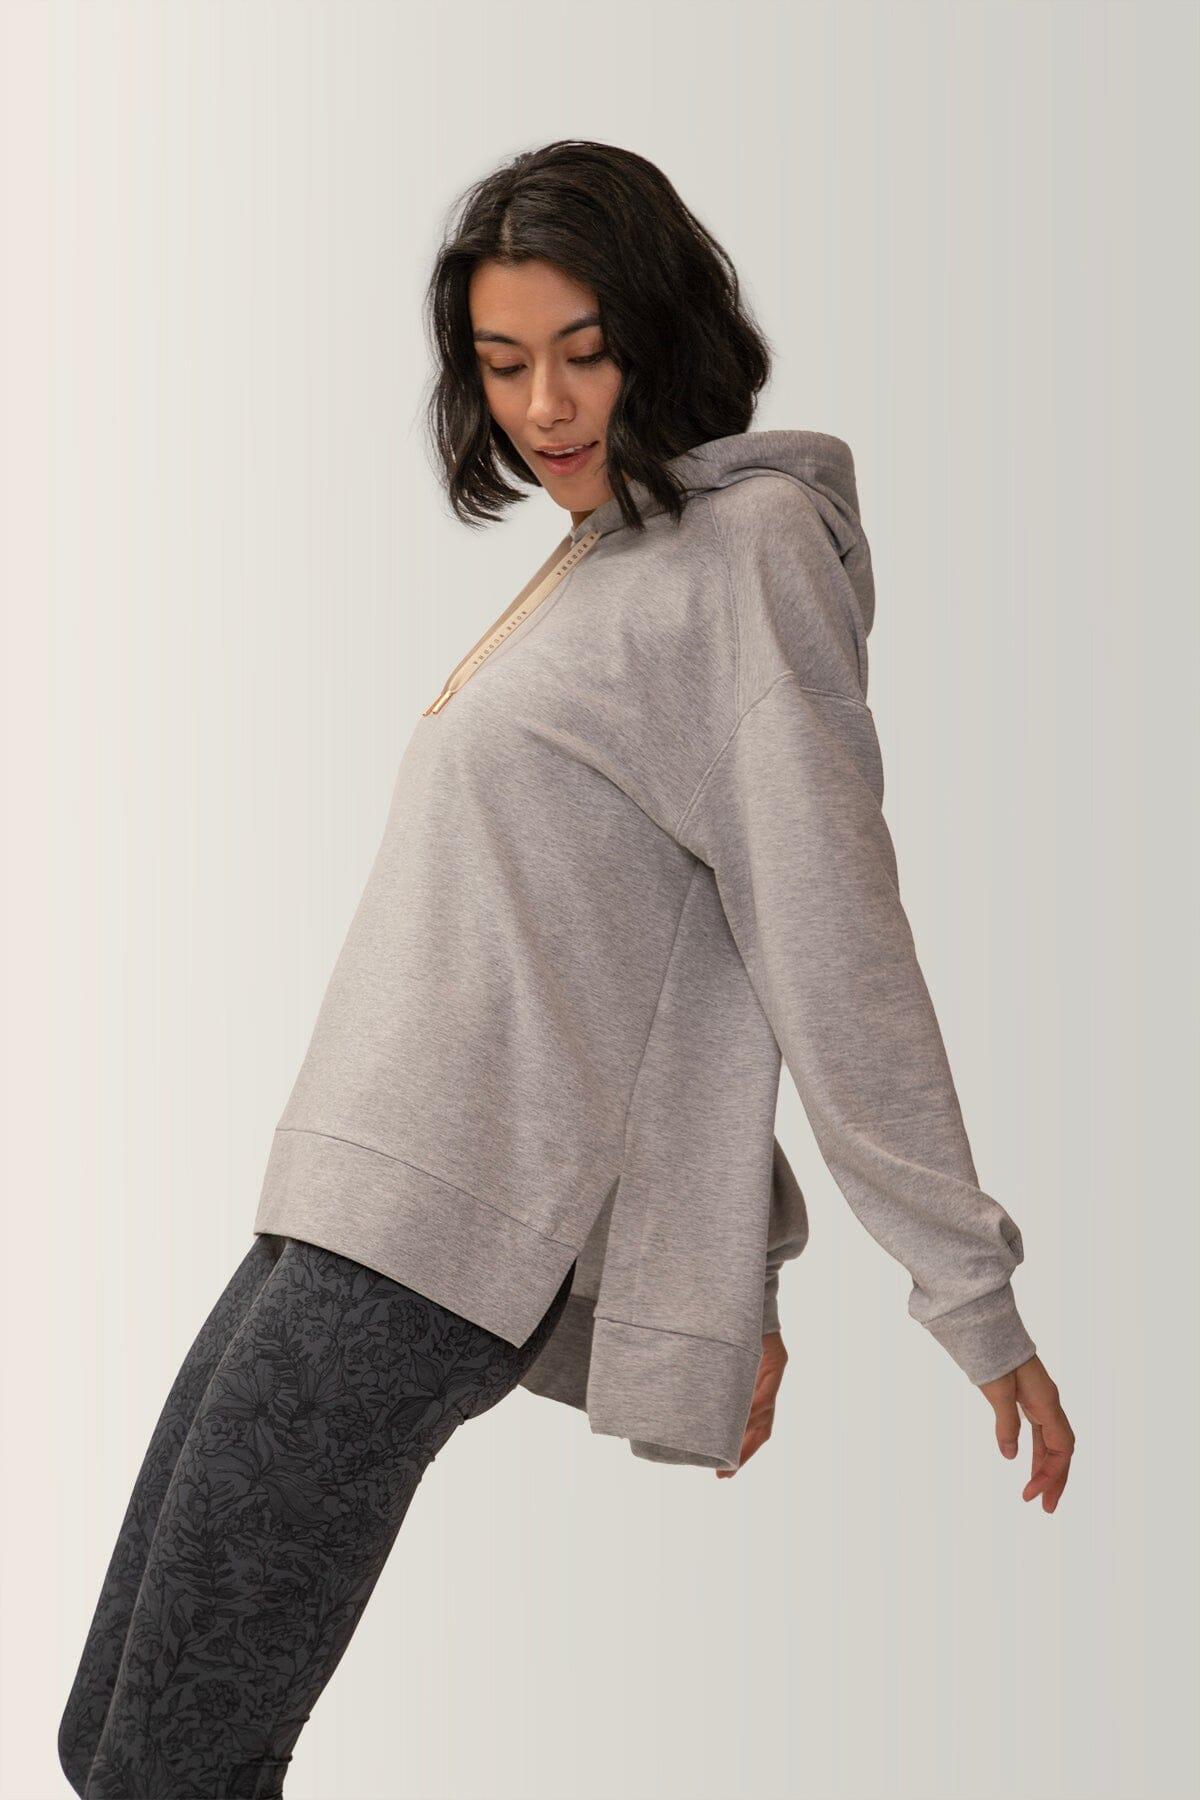 Femme qui porte le chandail Chill out de Rose Boreal./ Women wearing the Chill Out Hoodie by Rose Boreal. -Moon